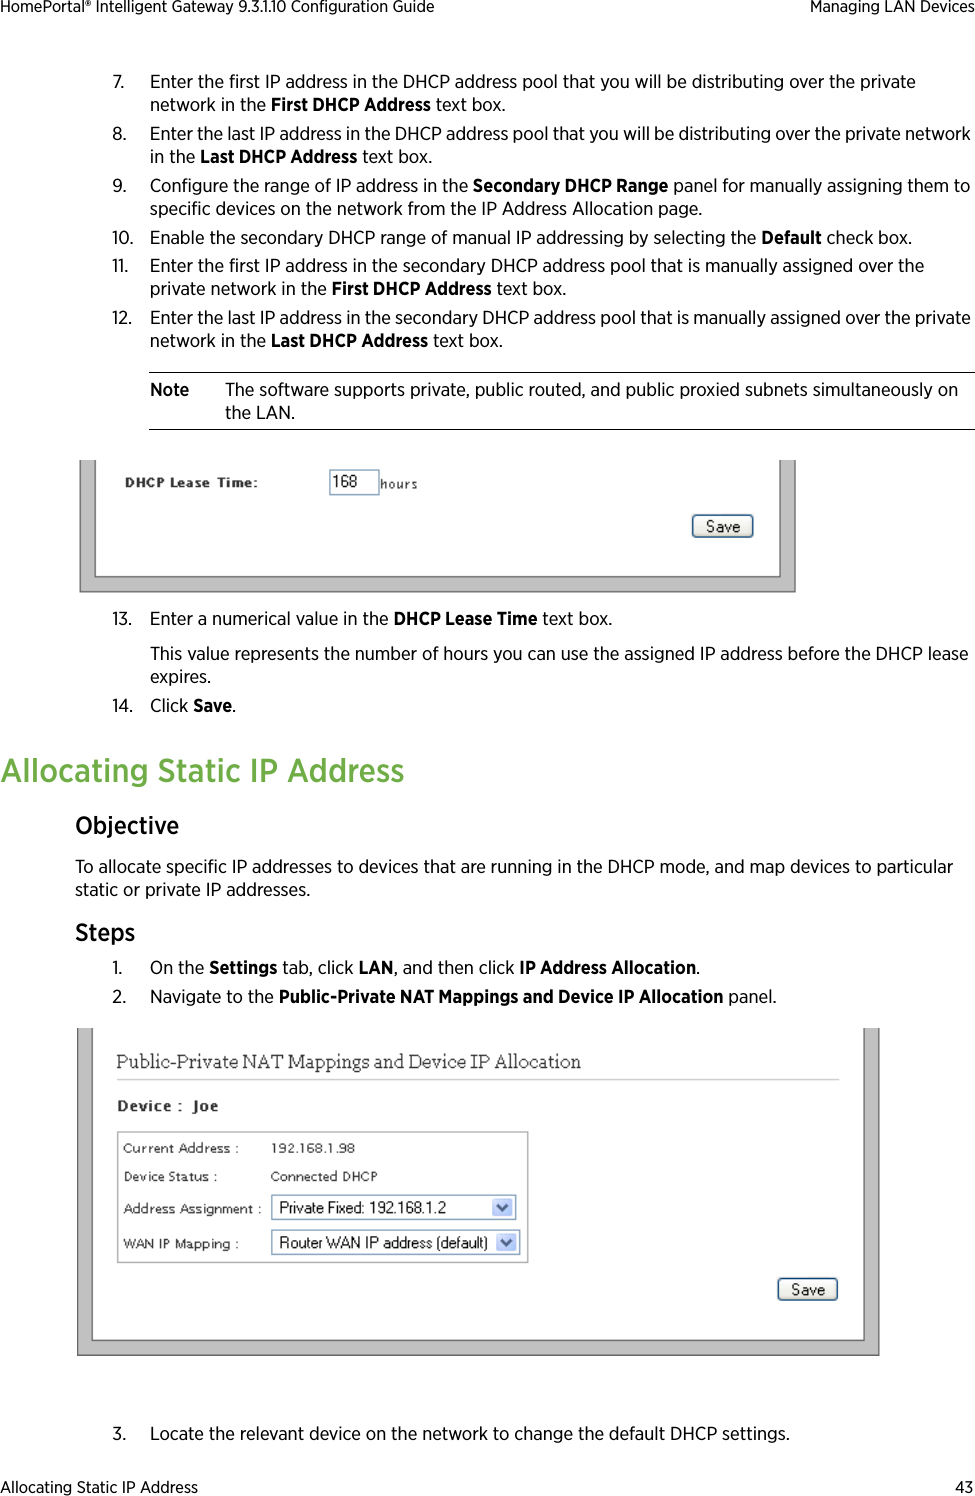 Allocating Static IP Address 43HomePortal® Intelligent Gateway 9.3.1.10 Configuration Guide Managing LAN Devices7. Enter the first IP address in the DHCP address pool that you will be distributing over the private network in the First DHCP Address text box.8. Enter the last IP address in the DHCP address pool that you will be distributing over the private network in the Last DHCP Address text box.9. Configure the range of IP address in the Secondary DHCP Range panel for manually assigning them to specific devices on the network from the IP Address Allocation page.10. Enable the secondary DHCP range of manual IP addressing by selecting the Default check box.11. Enter the first IP address in the secondary DHCP address pool that is manually assigned over the private network in the First DHCP Address text box.12. Enter the last IP address in the secondary DHCP address pool that is manually assigned over the private network in the Last DHCP Address text box.Note The software supports private, public routed, and public proxied subnets simultaneously on the LAN.13. Enter a numerical value in the DHCP Lease Time text box. This value represents the number of hours you can use the assigned IP address before the DHCP lease expires.14. Click Save.Allocating Static IP AddressObjectiveTo allocate specific IP addresses to devices that are running in the DHCP mode, and map devices to particular static or private IP addresses.Steps1. On the Settings tab, click LAN, and then click IP Address Allocation. 2. Navigate to the Public-Private NAT Mappings and Device IP Allocation panel.3. Locate the relevant device on the network to change the default DHCP settings.